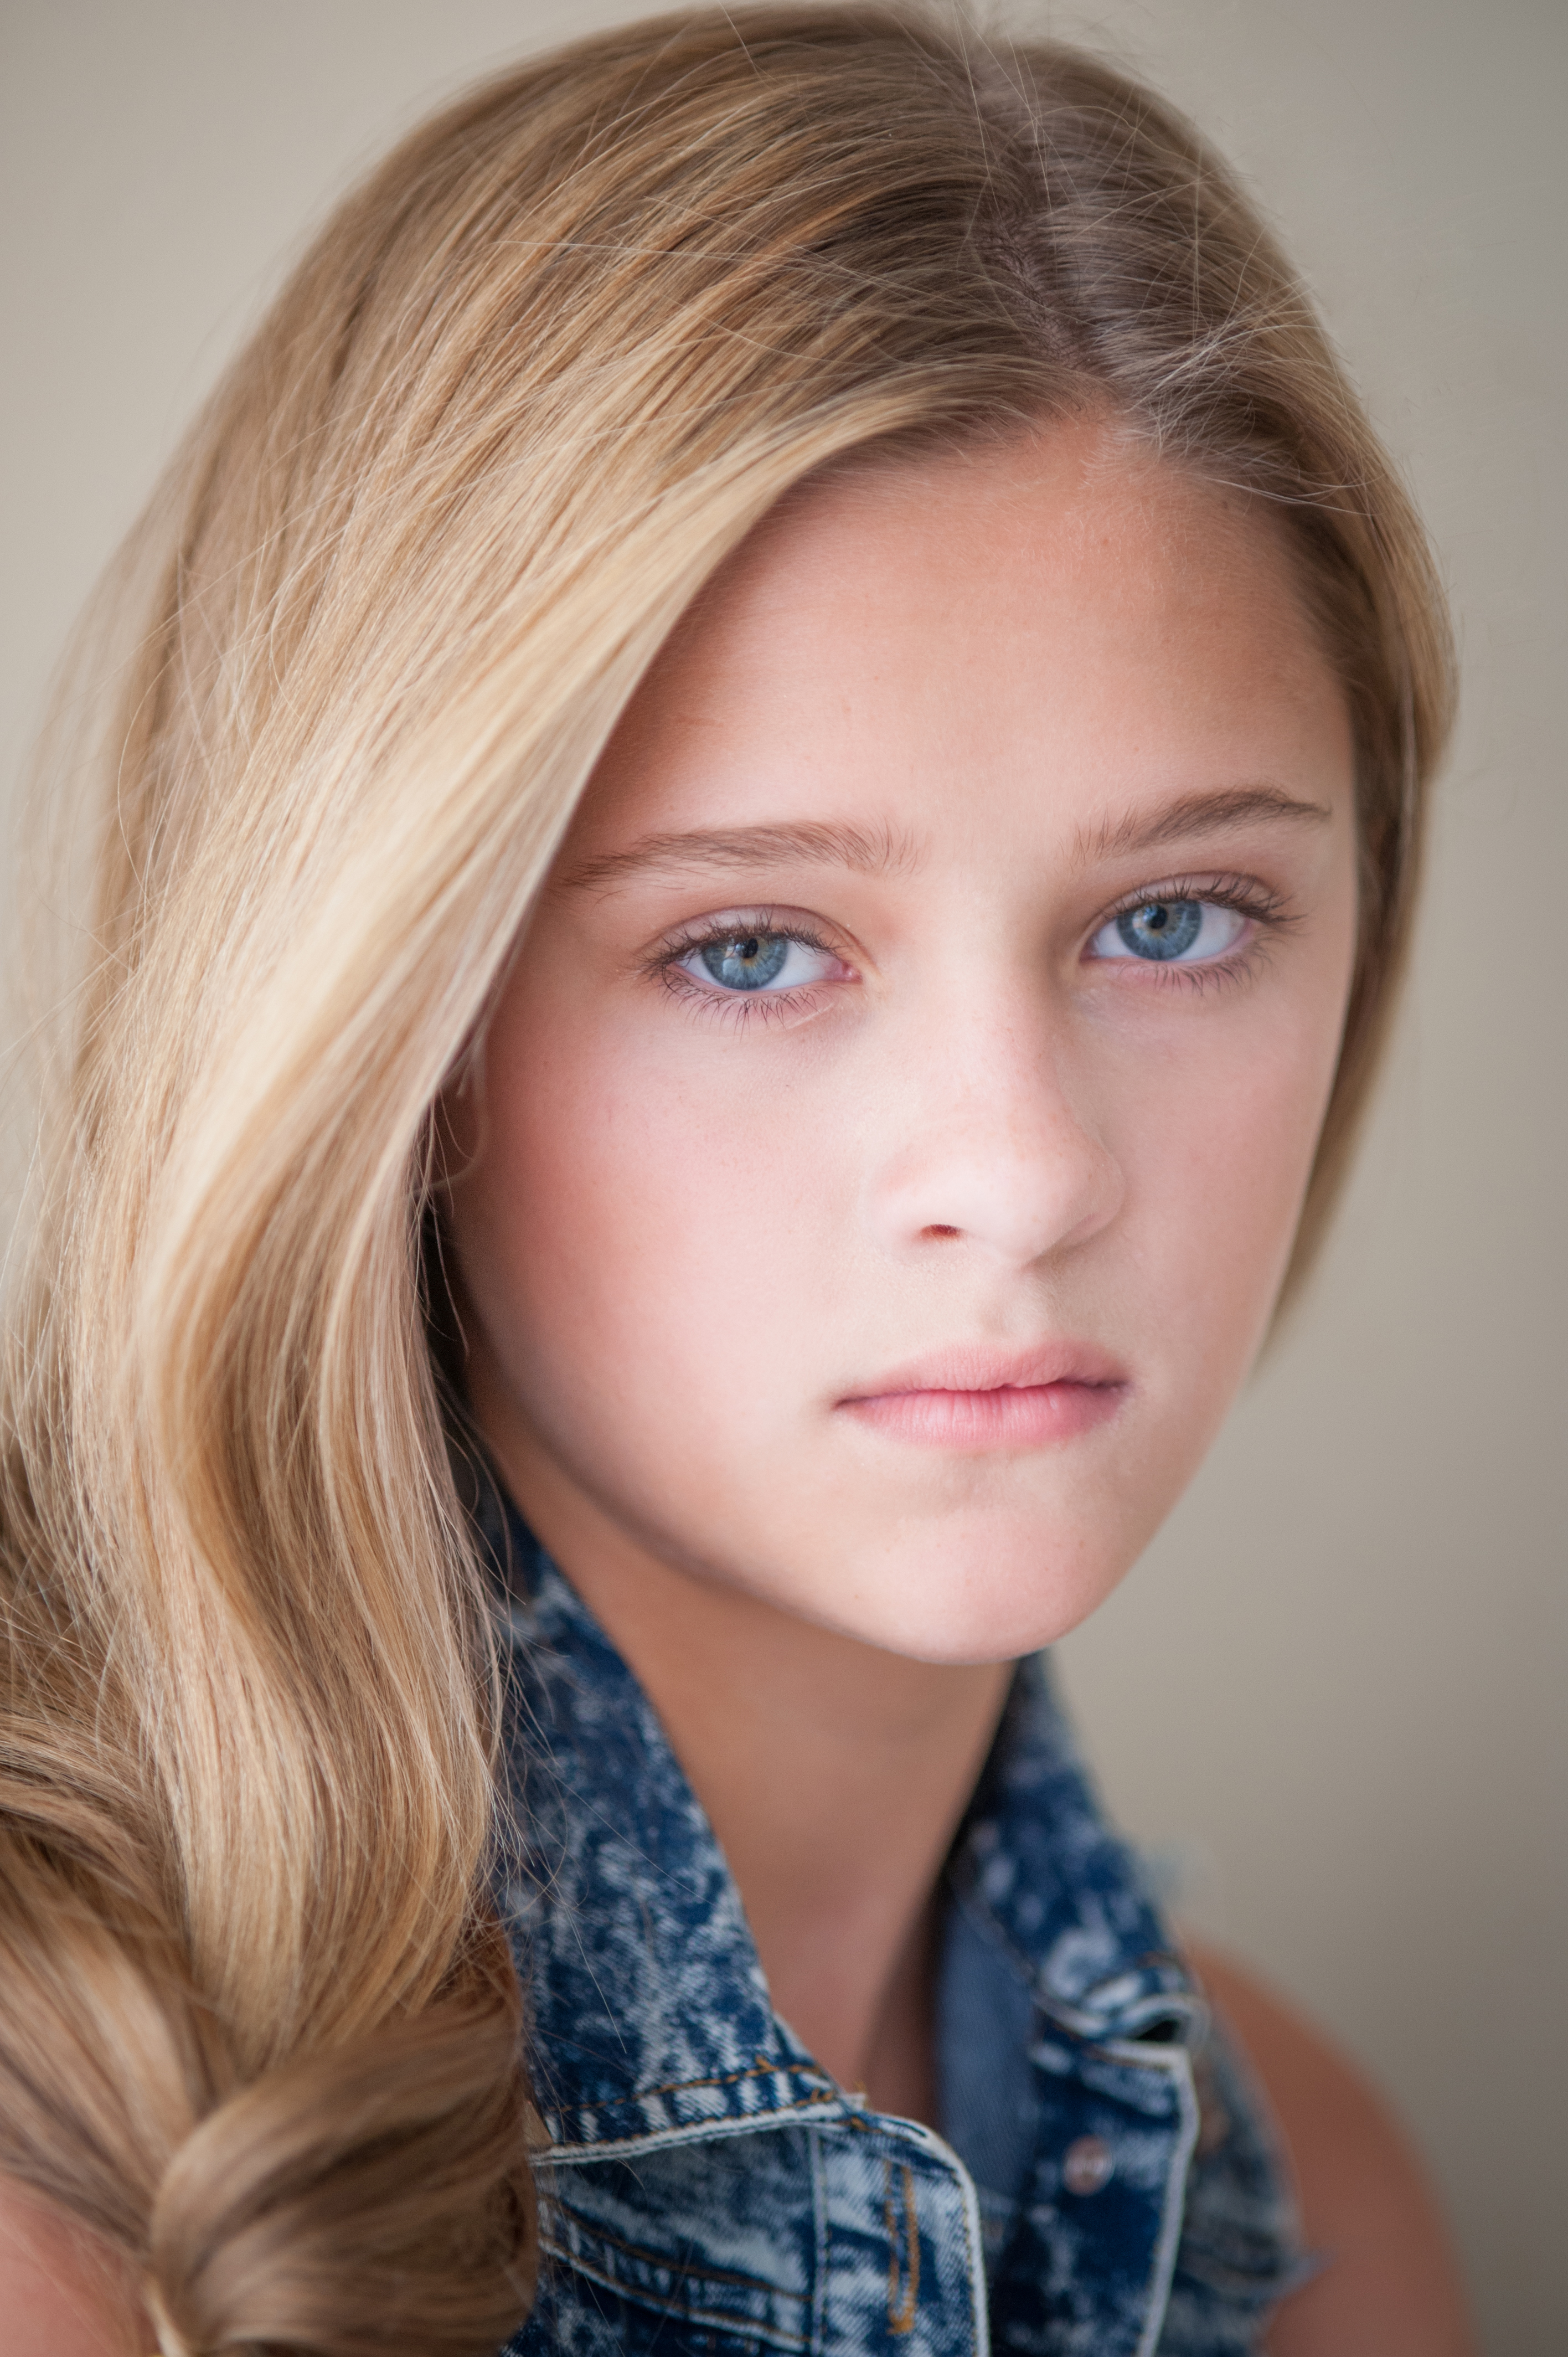 Lizzy Greene Wallpapers